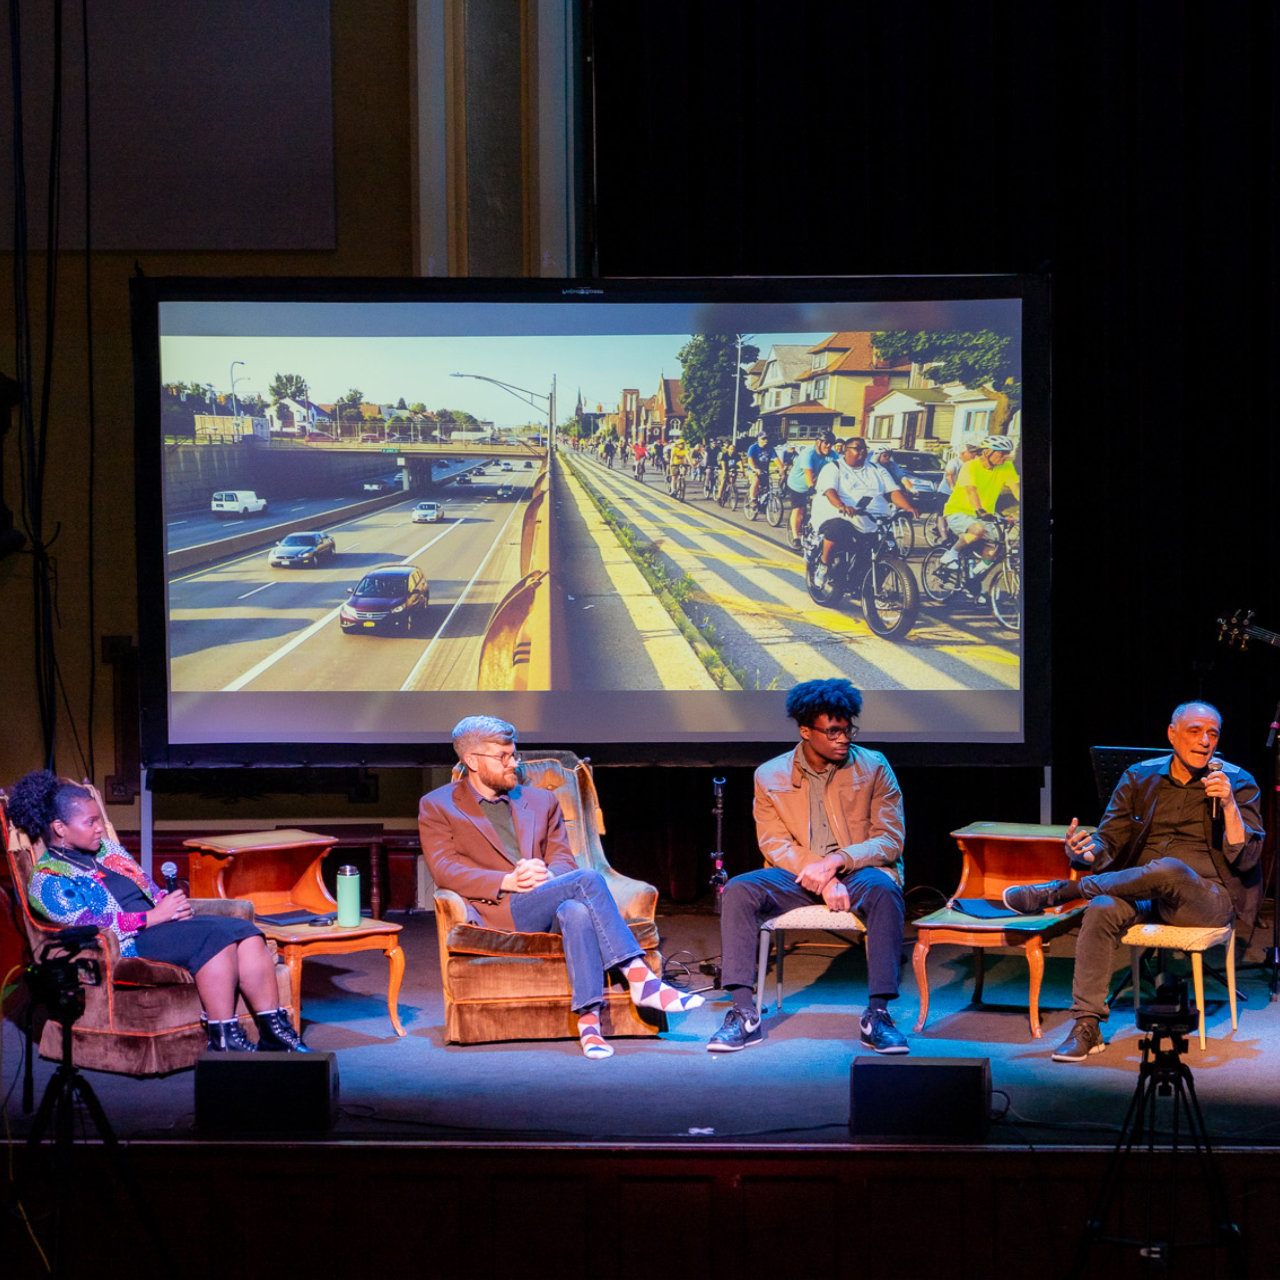 People sitting on stage talking at event - Square images